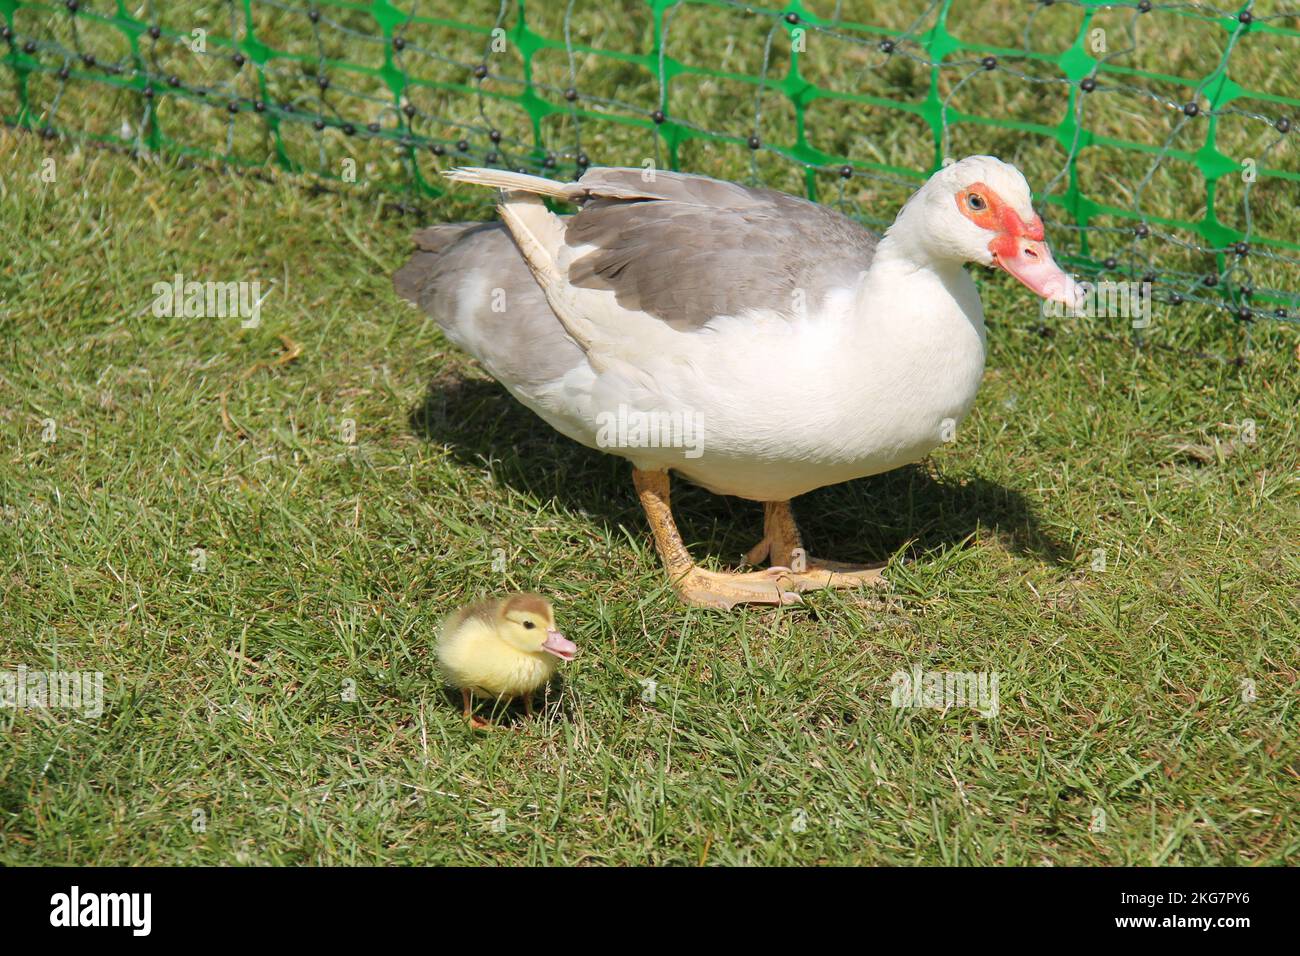 An Adult Mother Duck with a Baby Chick. Stock Photo